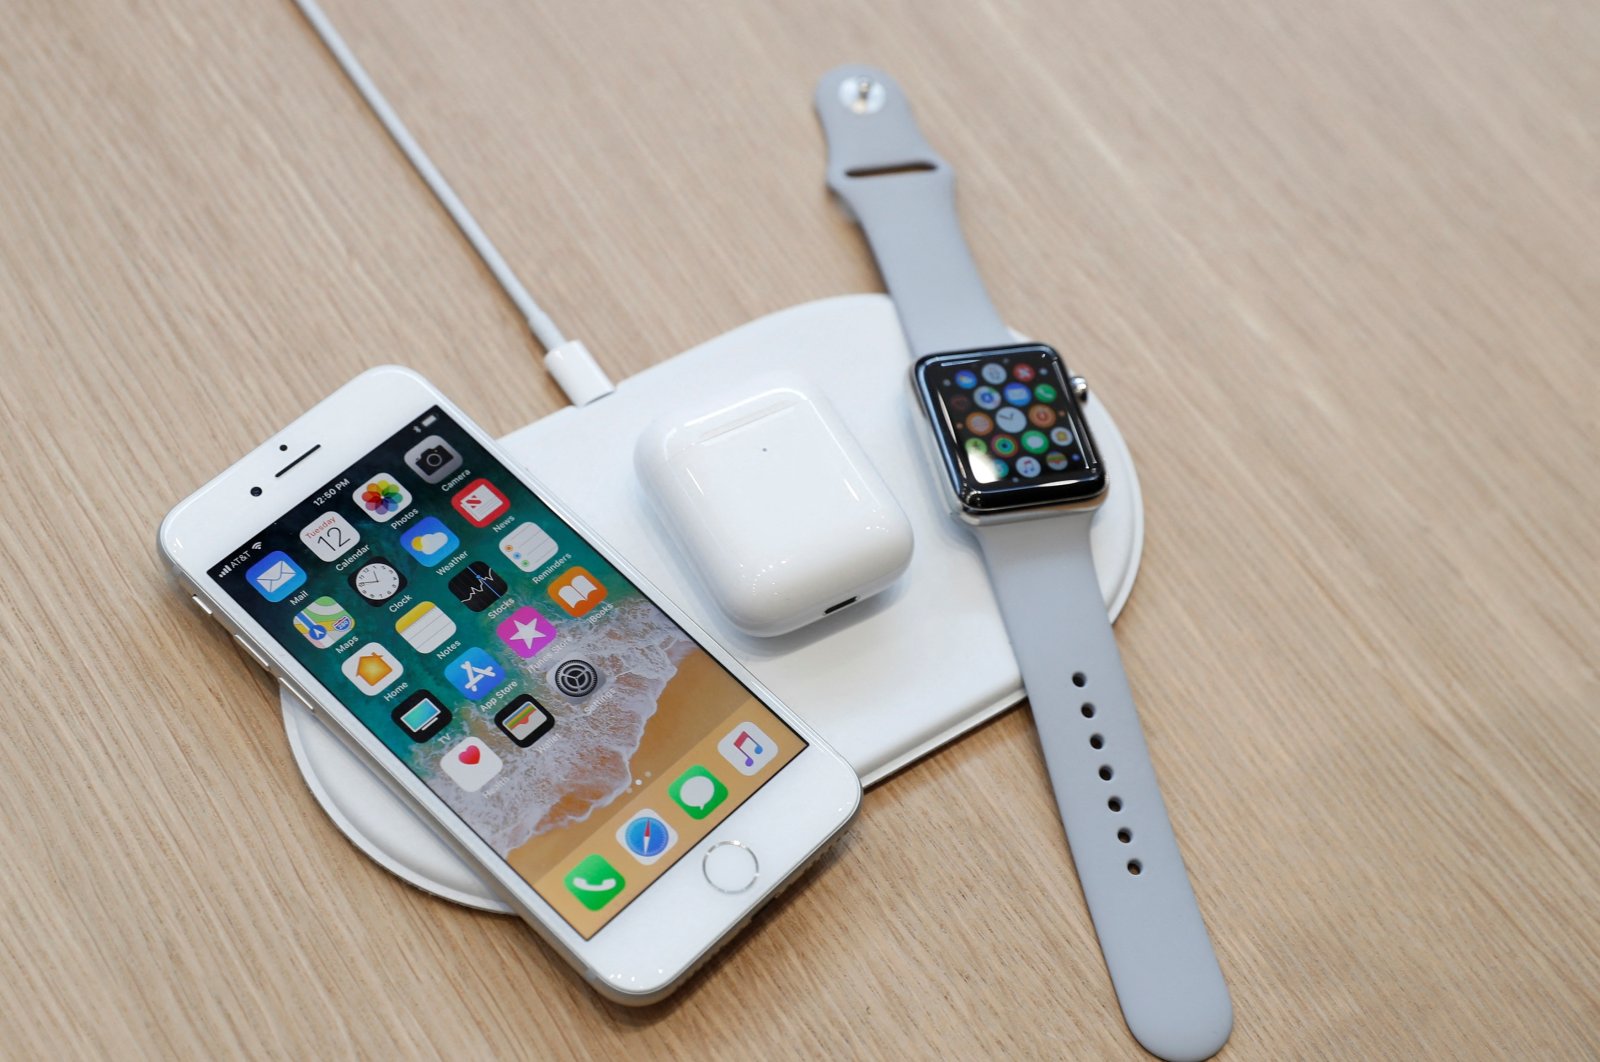 An AirPower wireless charger is displayed along with other products during an Apple launch event in Cupertino, California, U.S., Sept.12, 2017. (Reuters File Photo)